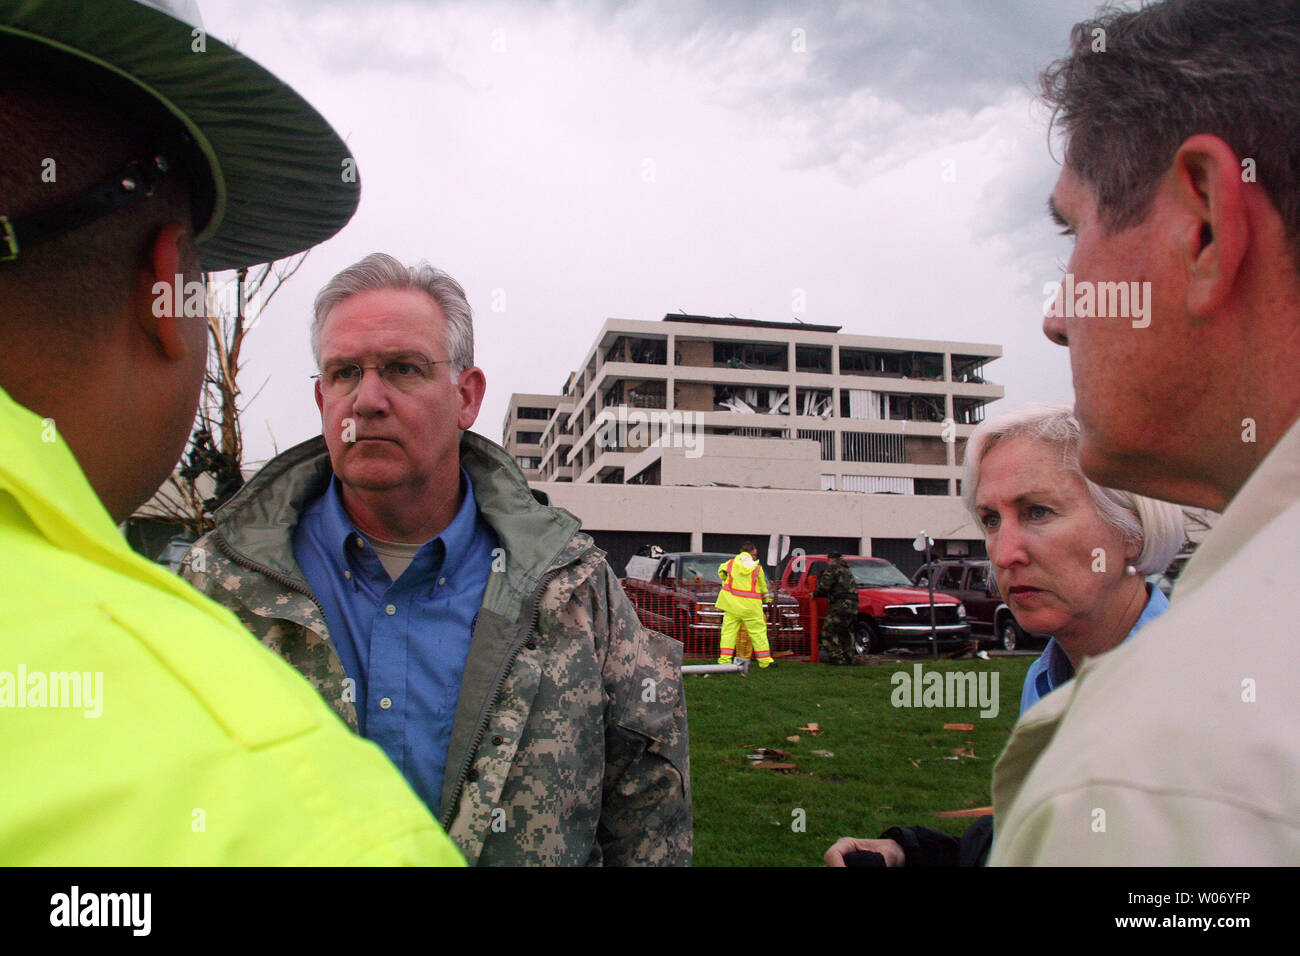 Missouri Governor Jay Nixon and First Lady Georganne Nixon talk with police outside Saint .John's Mercy Hospital in Joplin, Missouri on May 23, 2011. Officials say a EF-4 tornado cut a path a mile wide by four miles, destroying over 2000 homes and businesses on May 22, claiming 116 lives so far. UPI/Tom Uhlenbrock Stock Photo